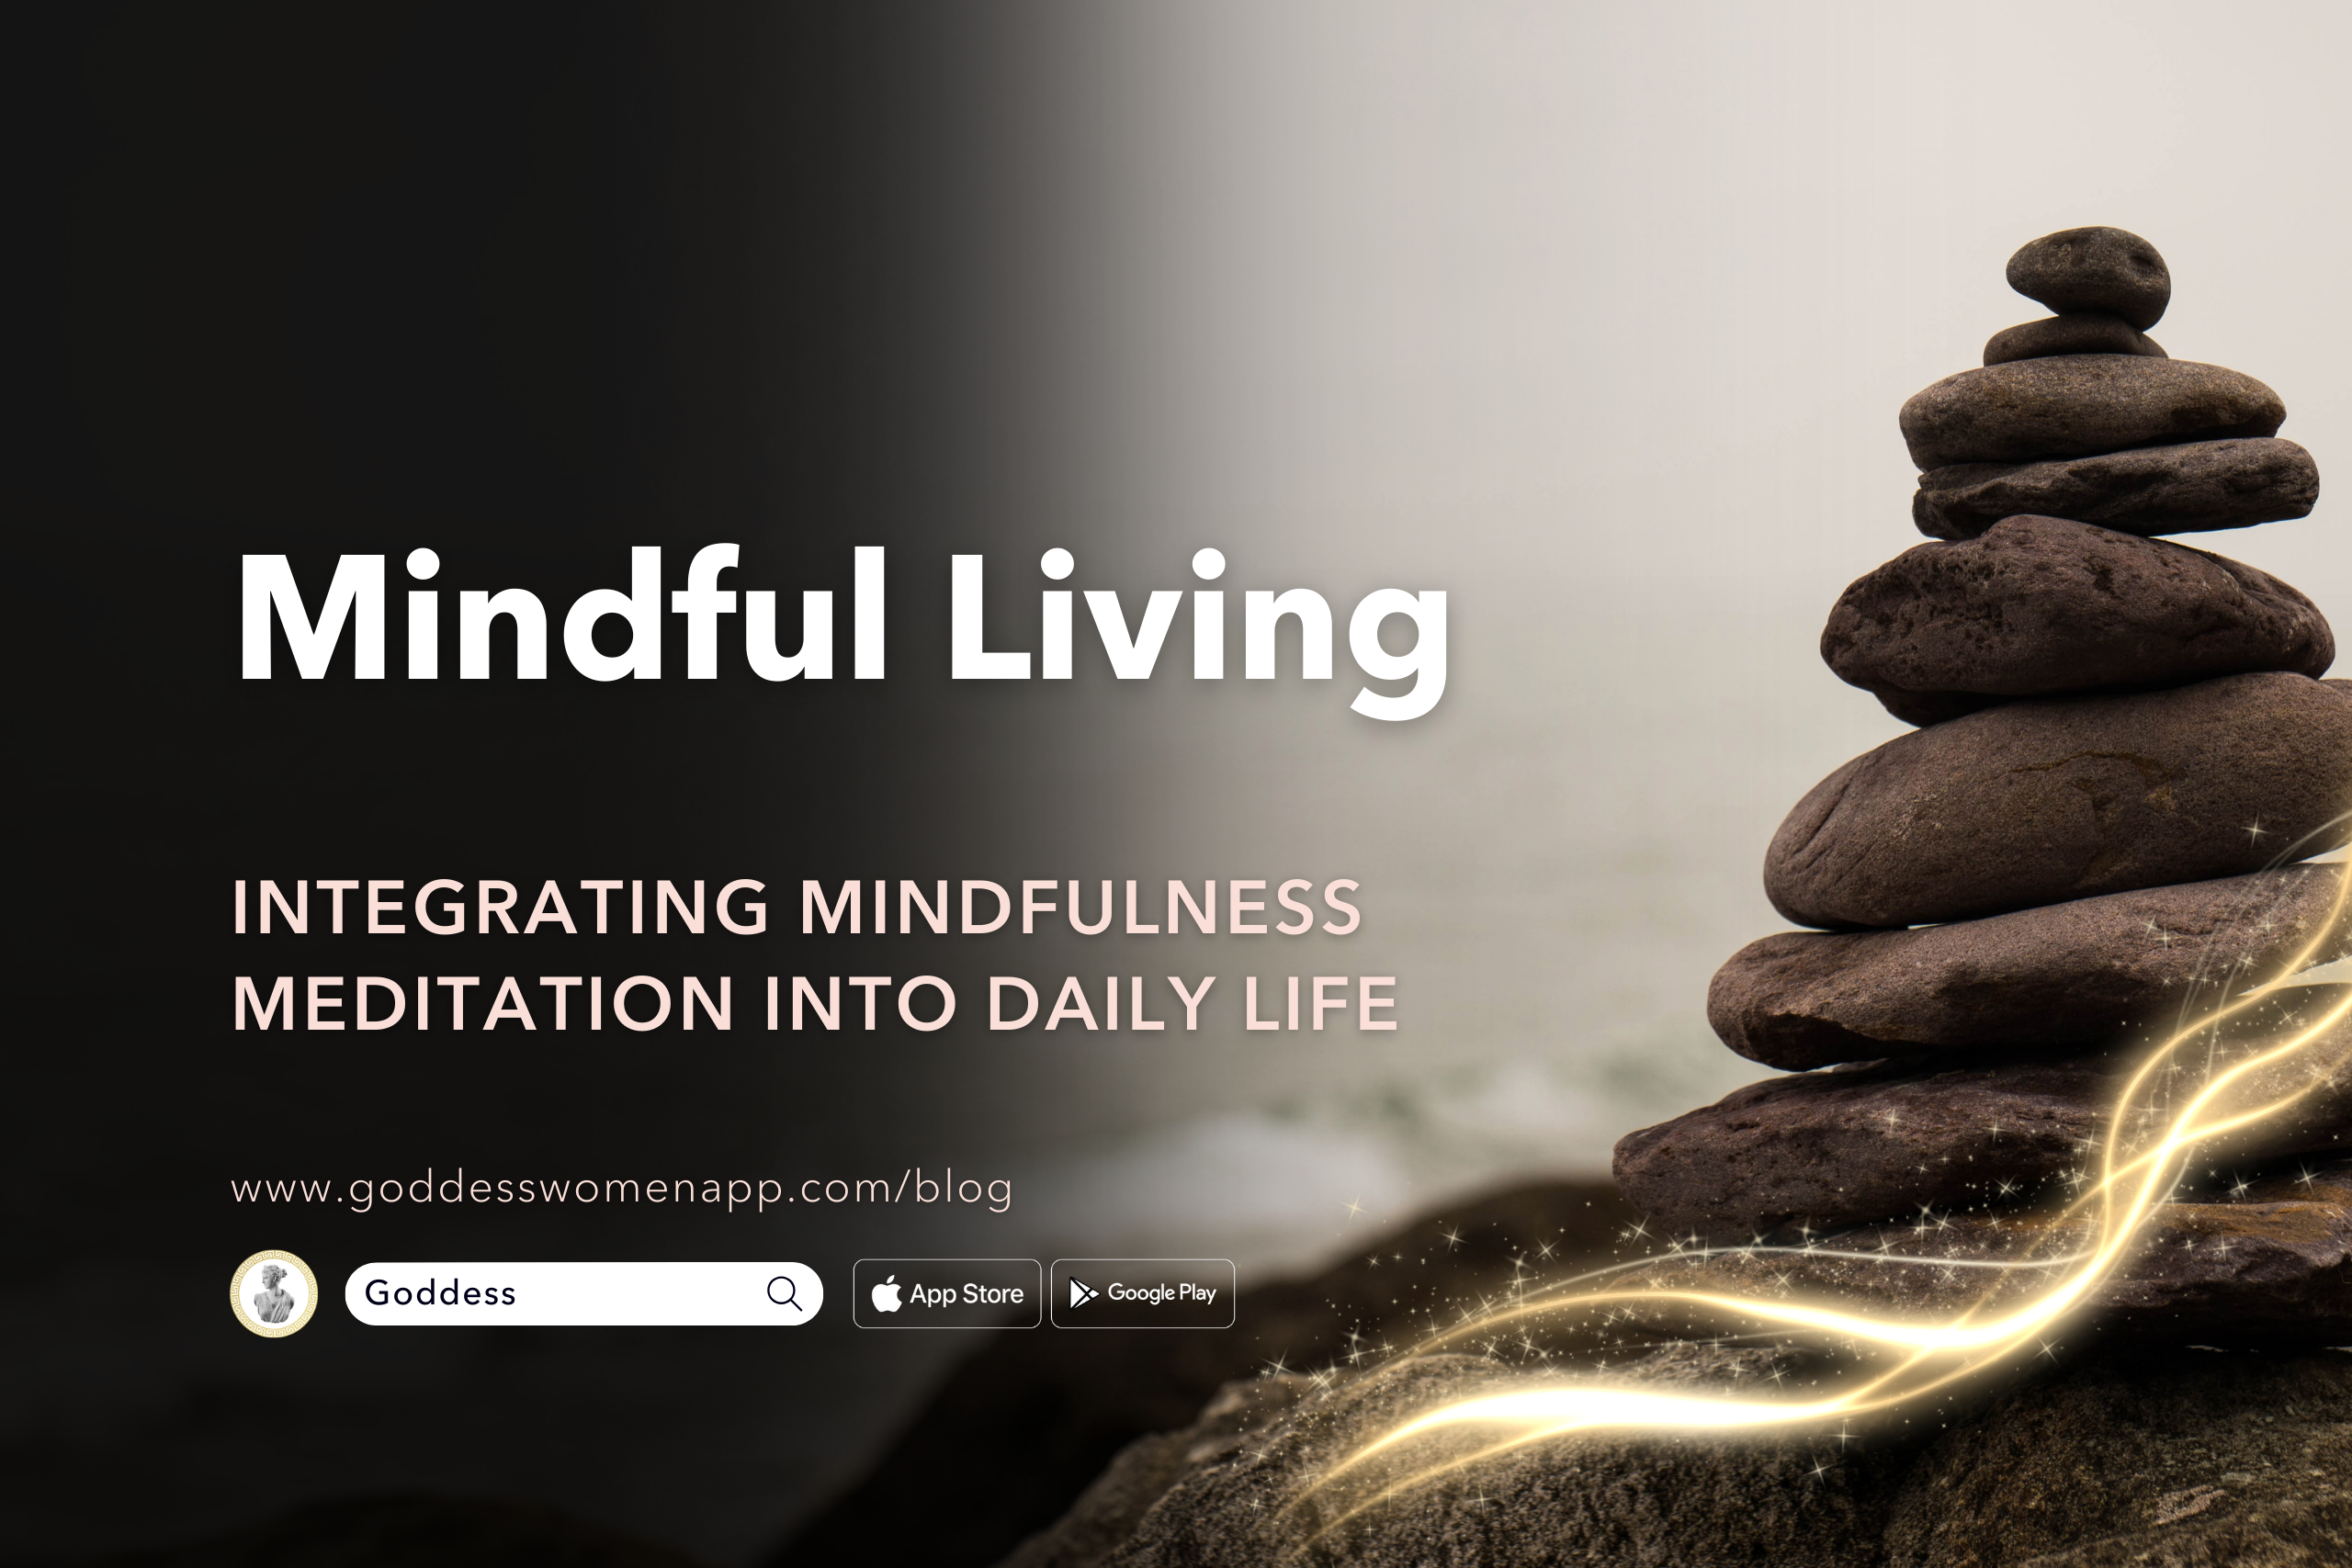 Mindful Living: Integrating Mindfulness Meditation into Daily Life in 6 Easy Steps